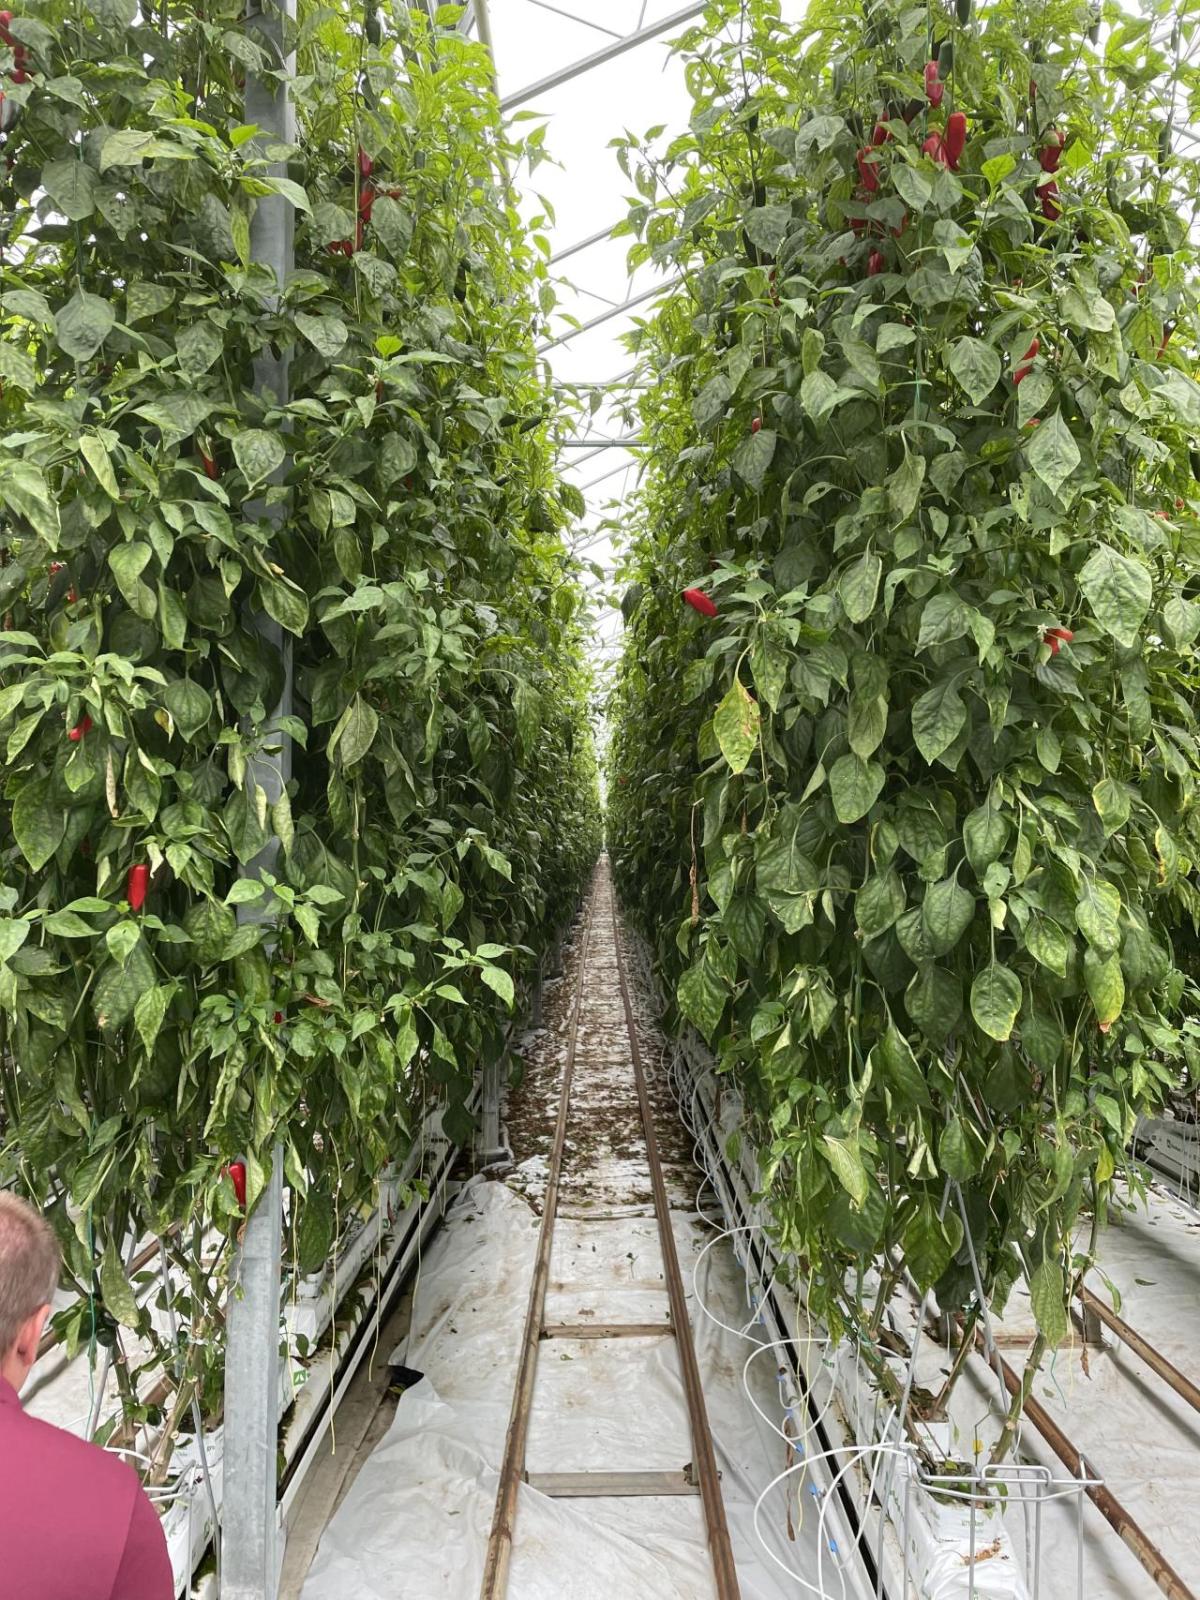 Inside of greenhouse